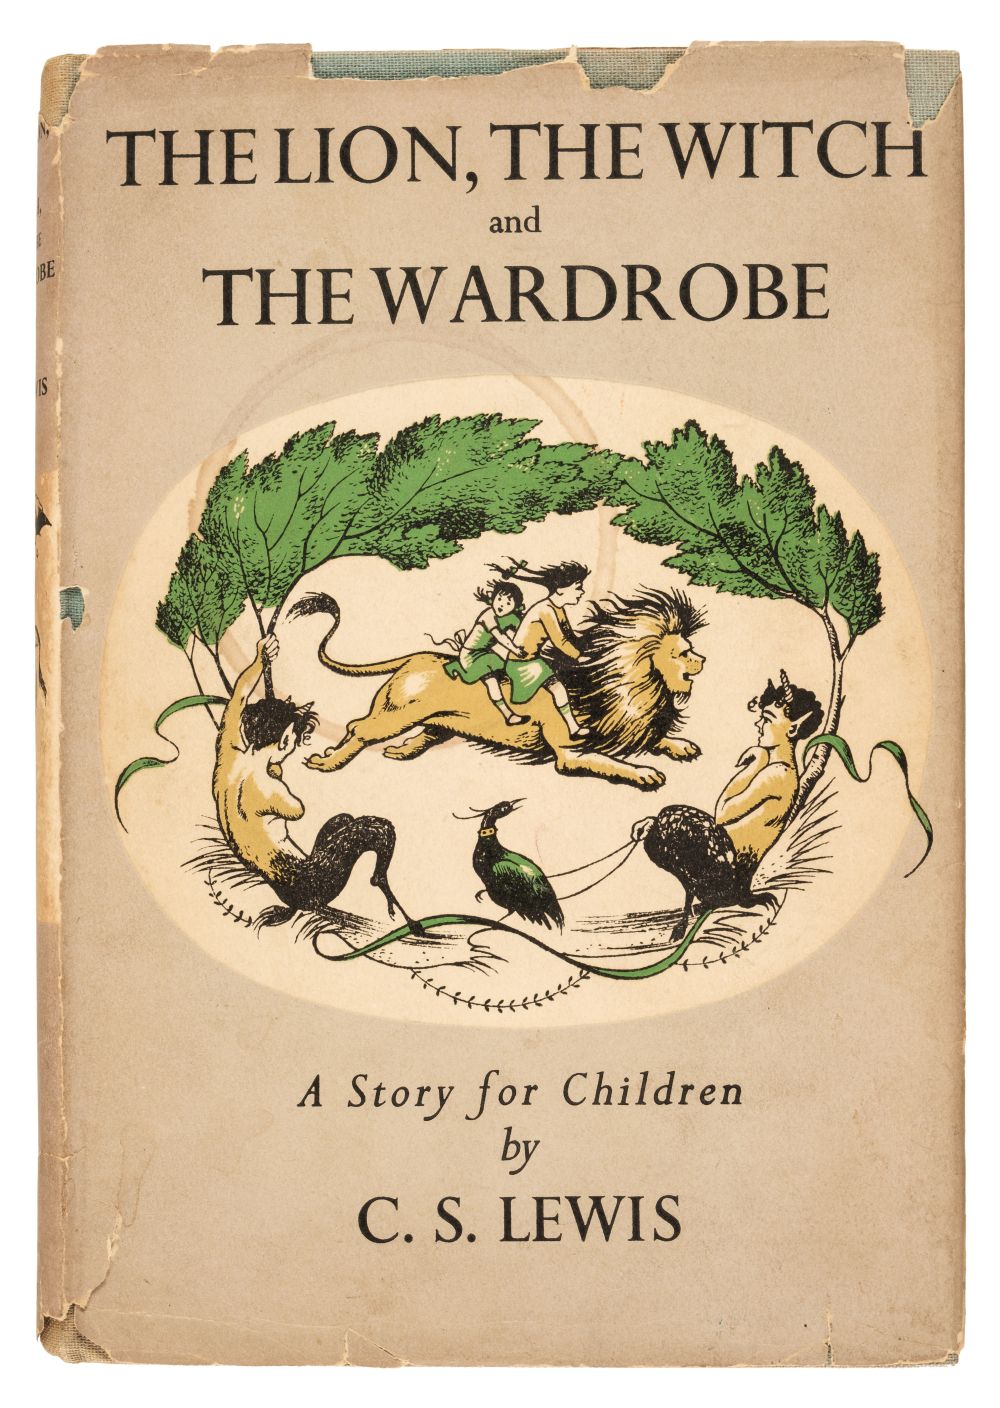 Lewis (C.S.) The Lion, the Witch and the Wardrobe, 1st edition, 1950